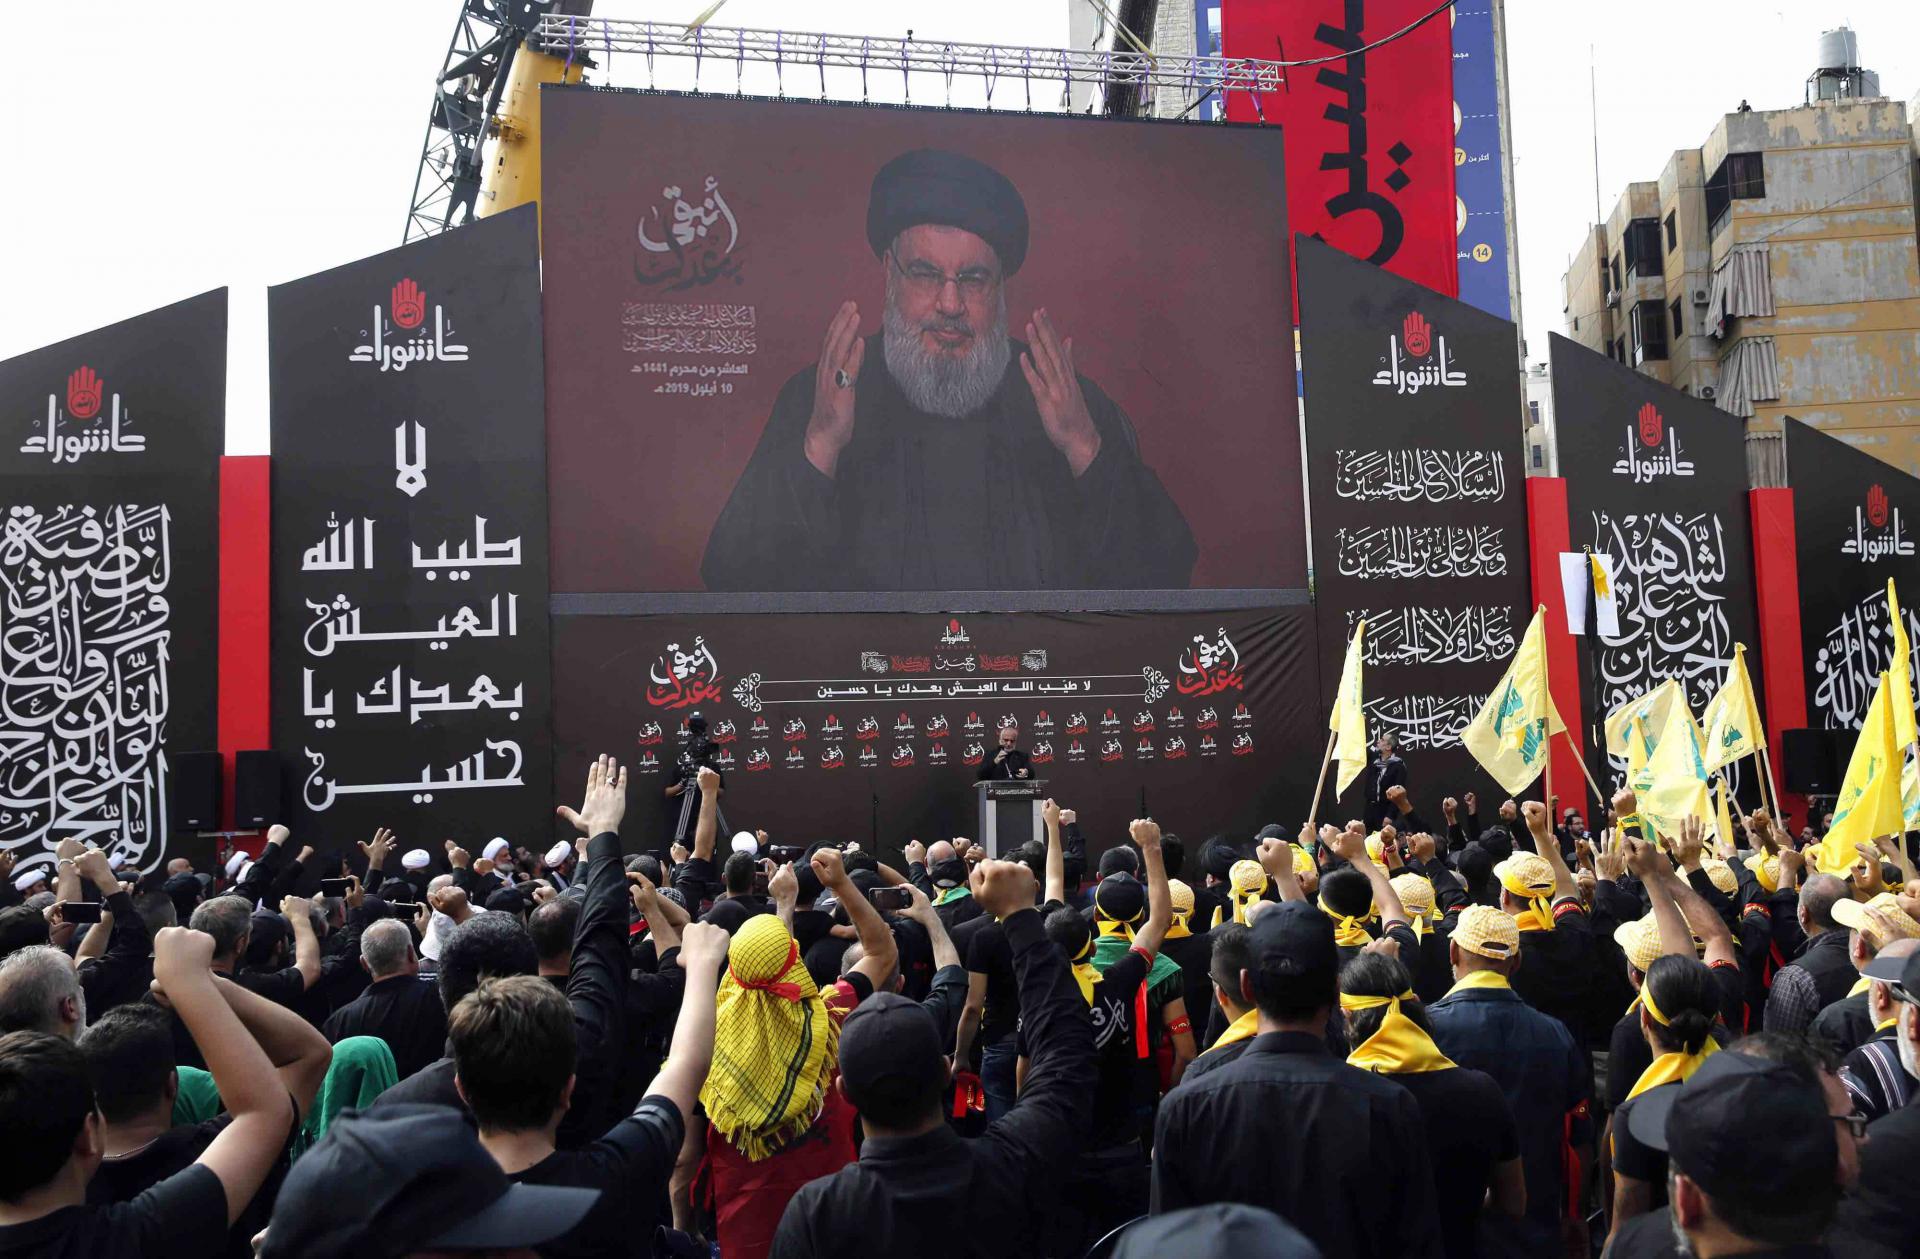 "In the event of an attack on Lebanon, in any form whatsoever, there will be an adequate response to the aggression," Nasrallah warned in a speech watched by thousands